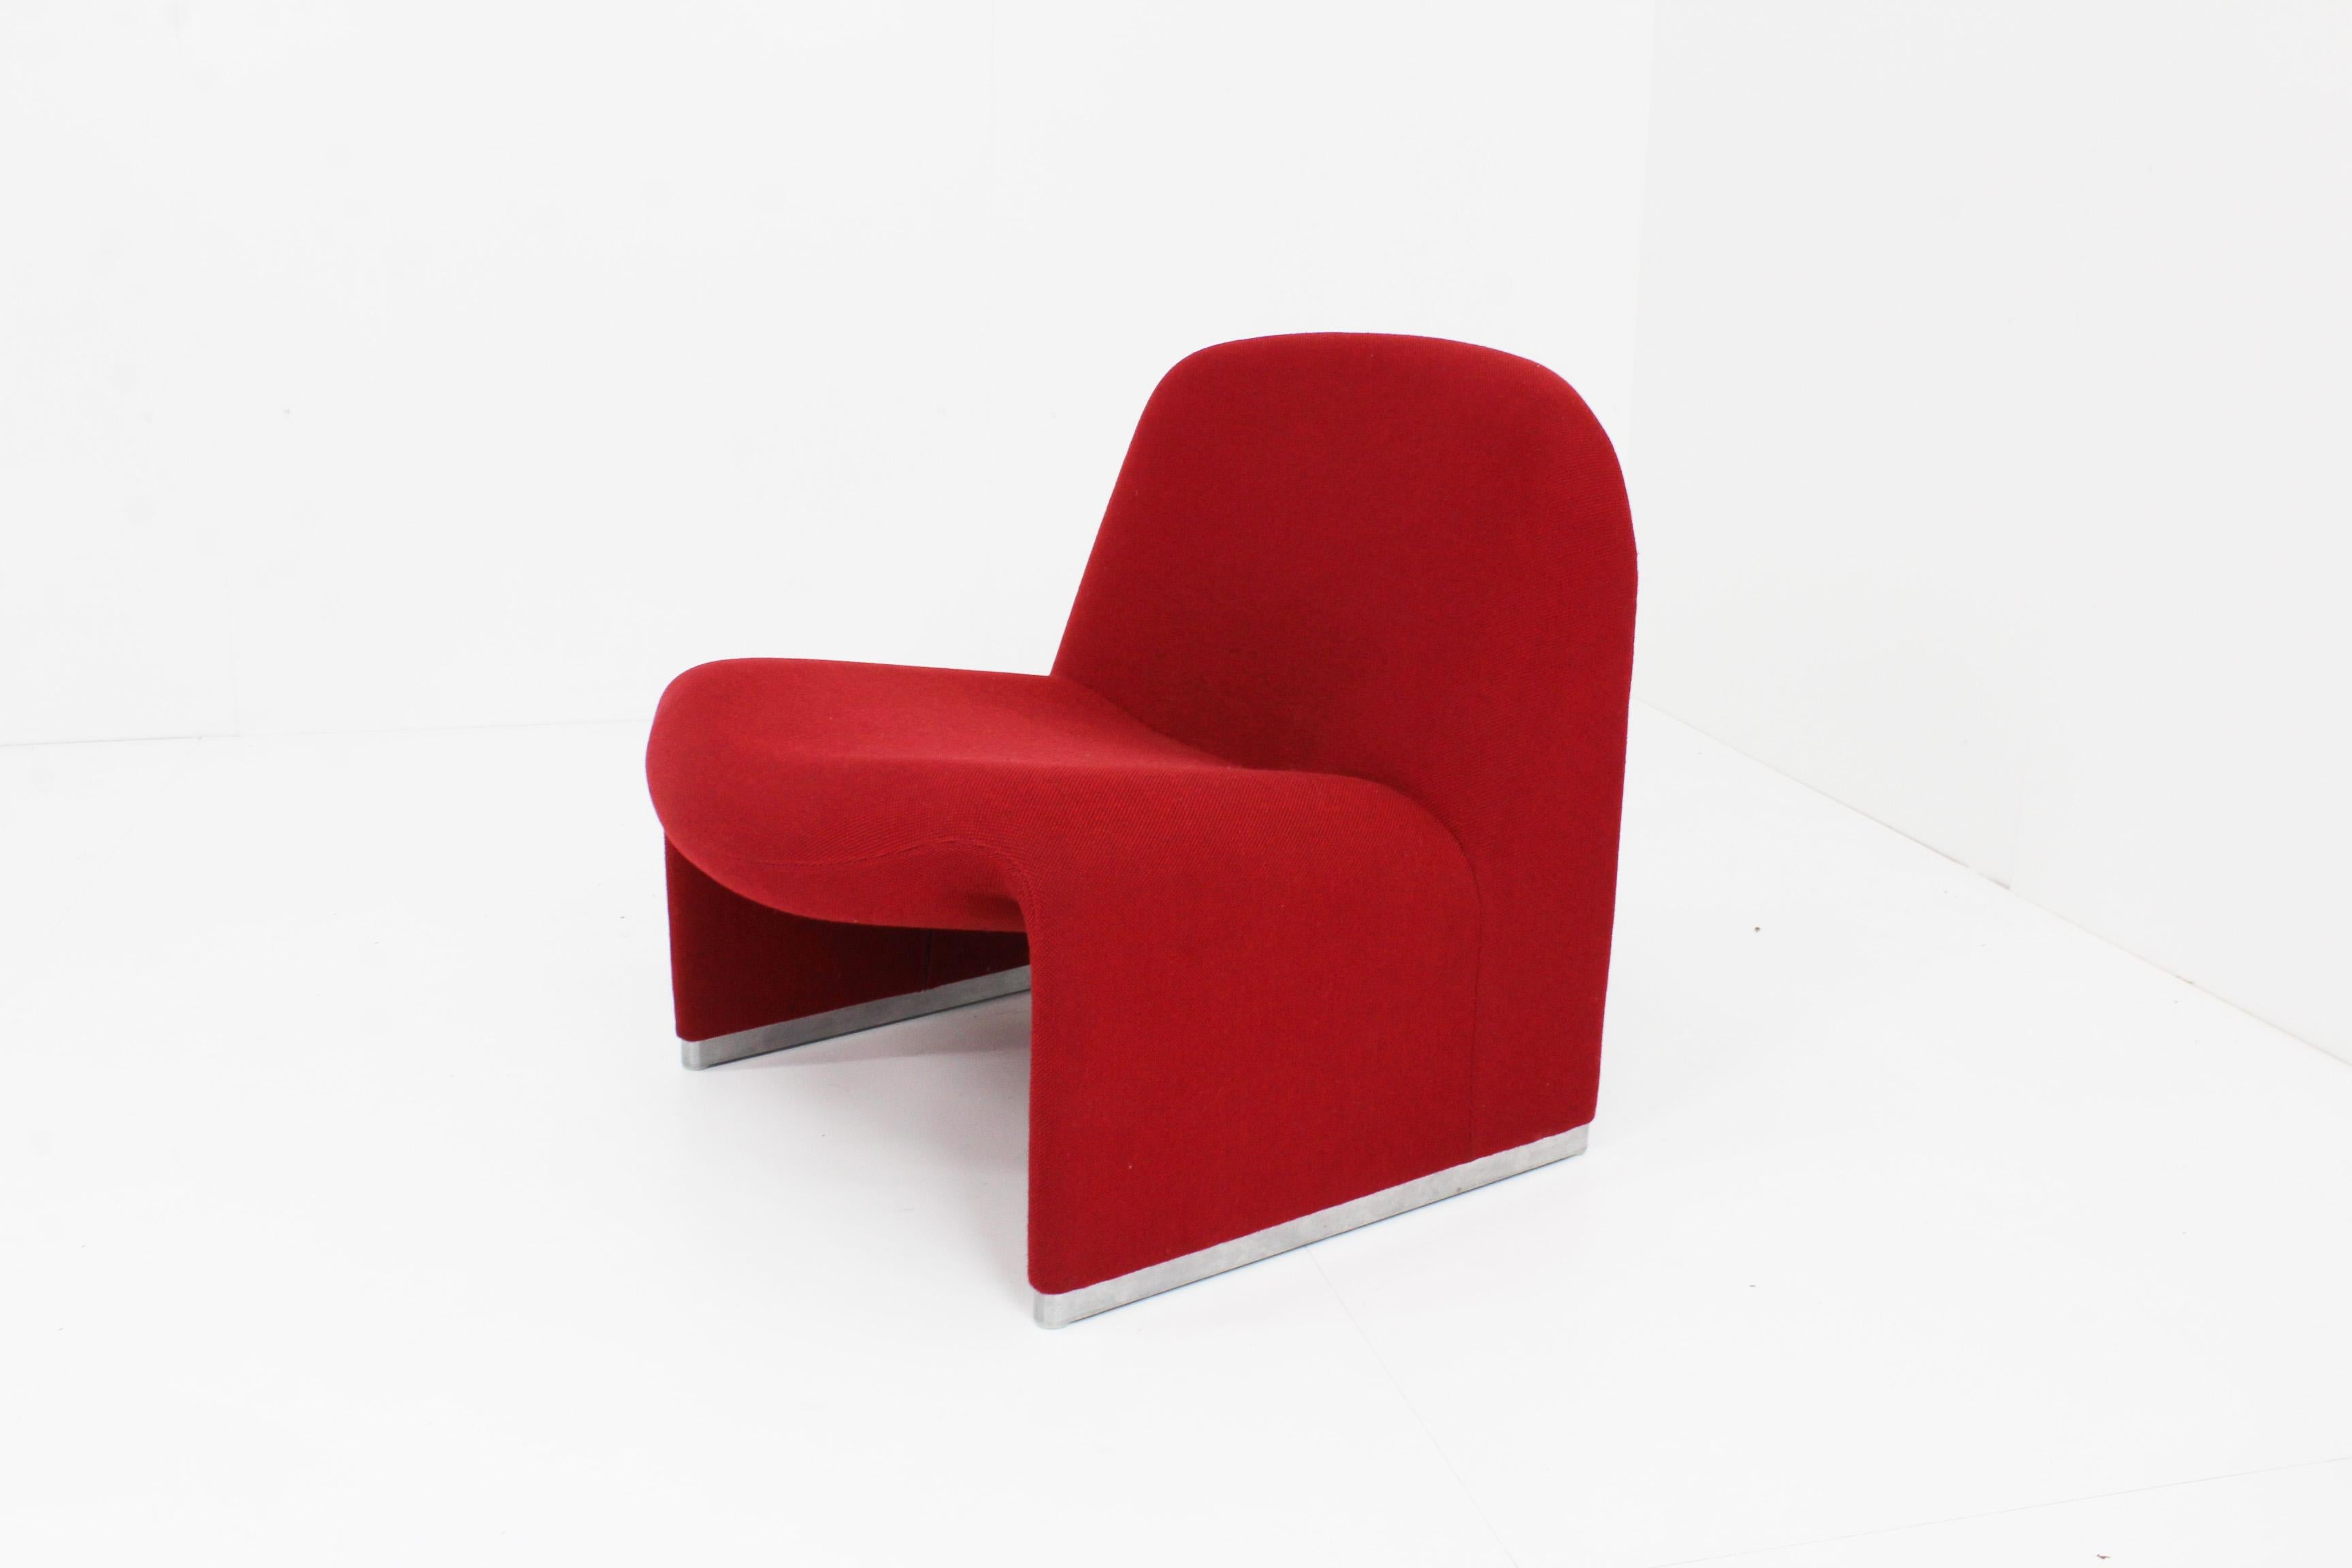 Alky chairs by Giancarlo Piretti.

Artifort Alky design armchairs designed by Giancarlo Piretti in a beautiful red colour.

The condition of the chairs are very good. The foam as well as the fabric are in very good condition.

